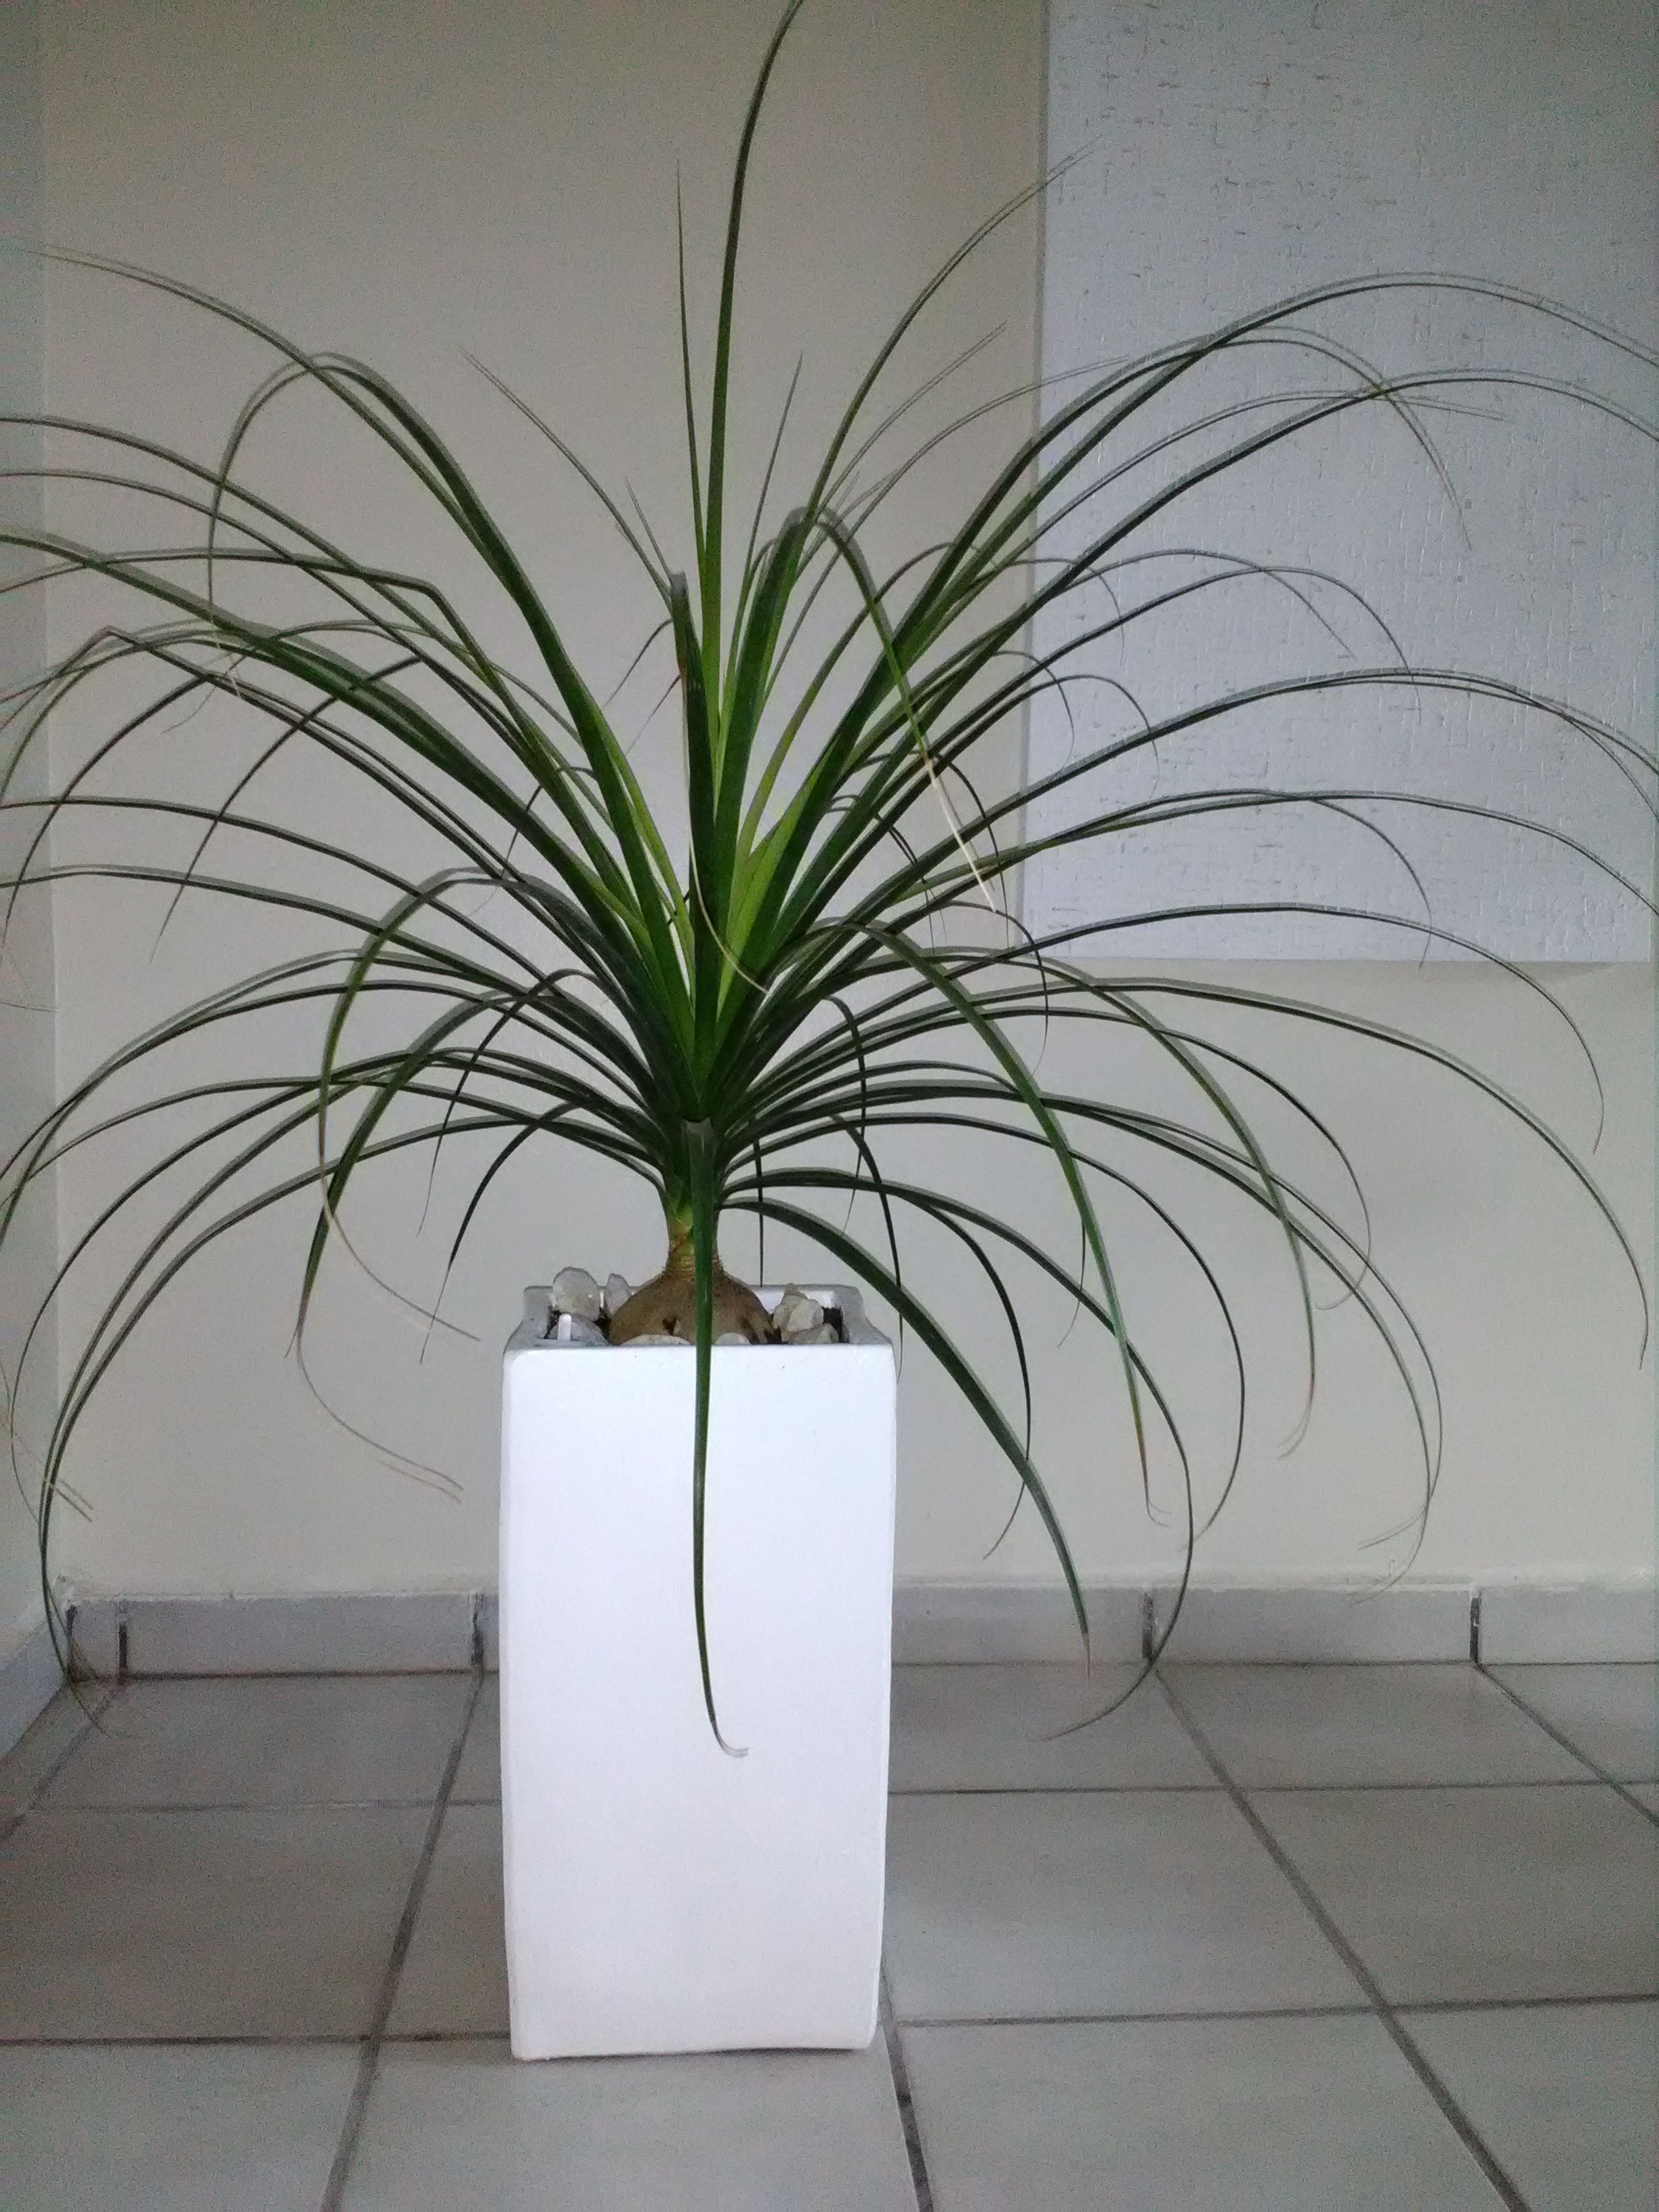 Home Decor, decorative Plant in large planter pot, living room dining room bedroom